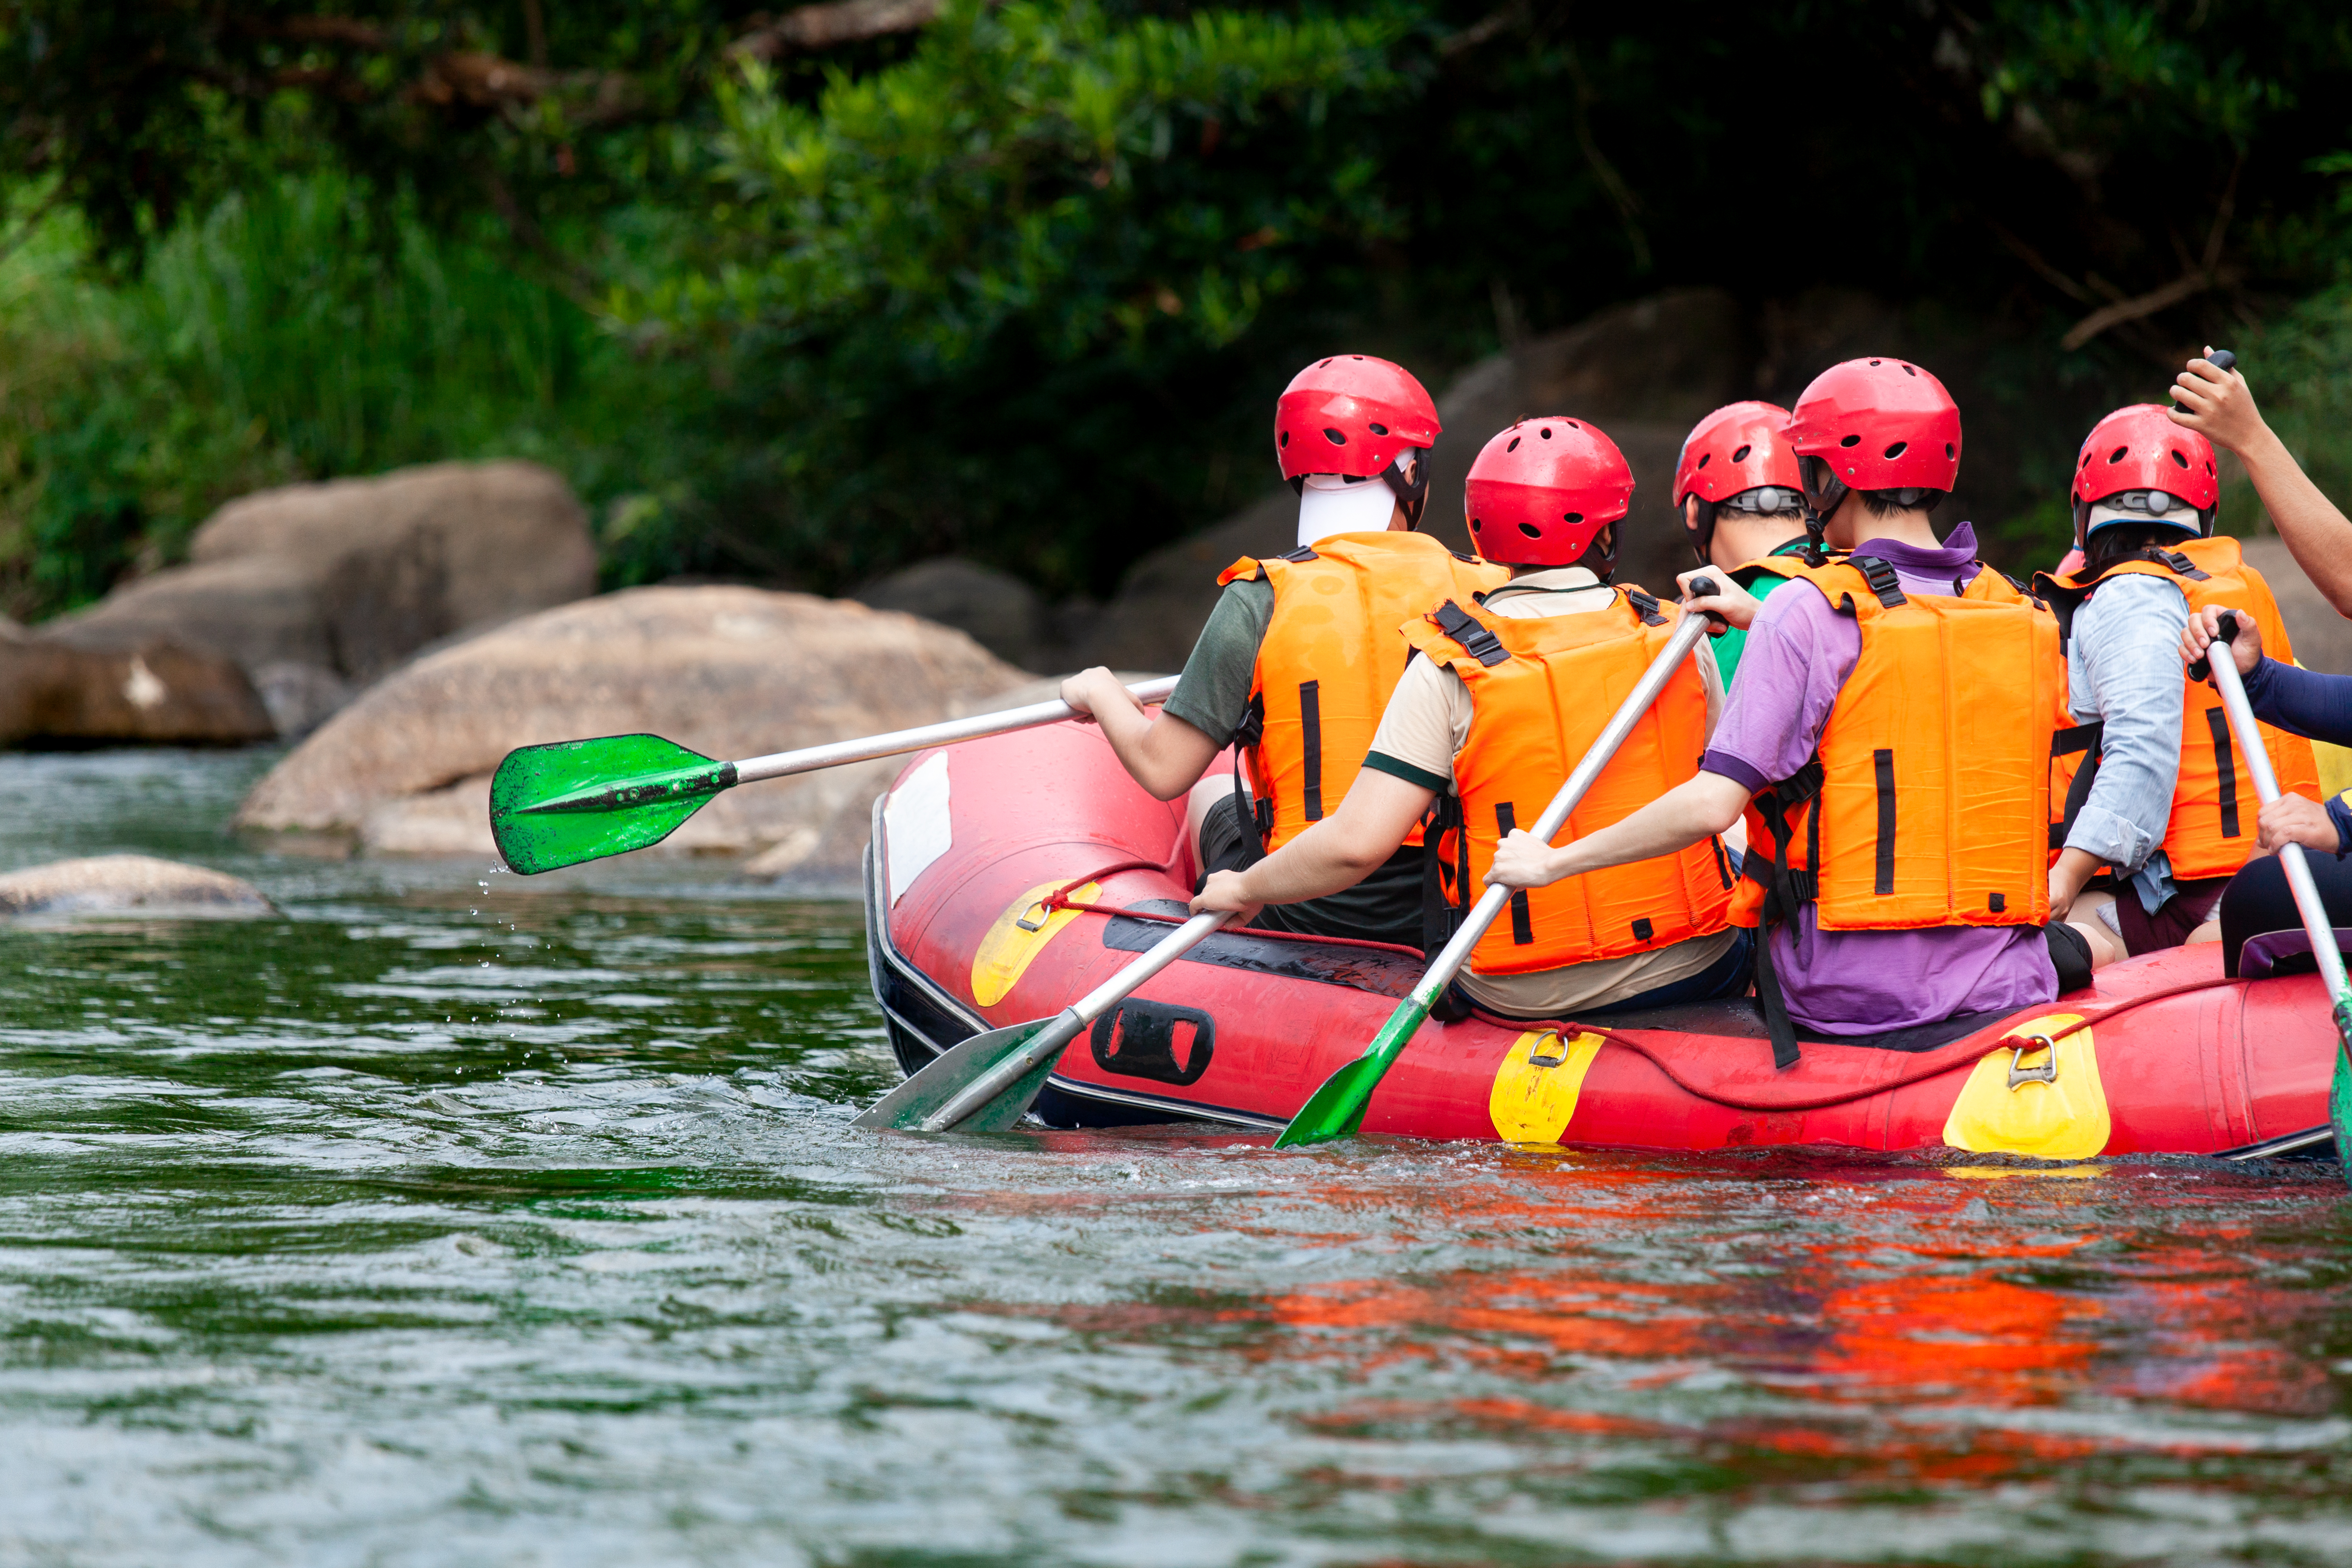 group-young-person-rafting-river